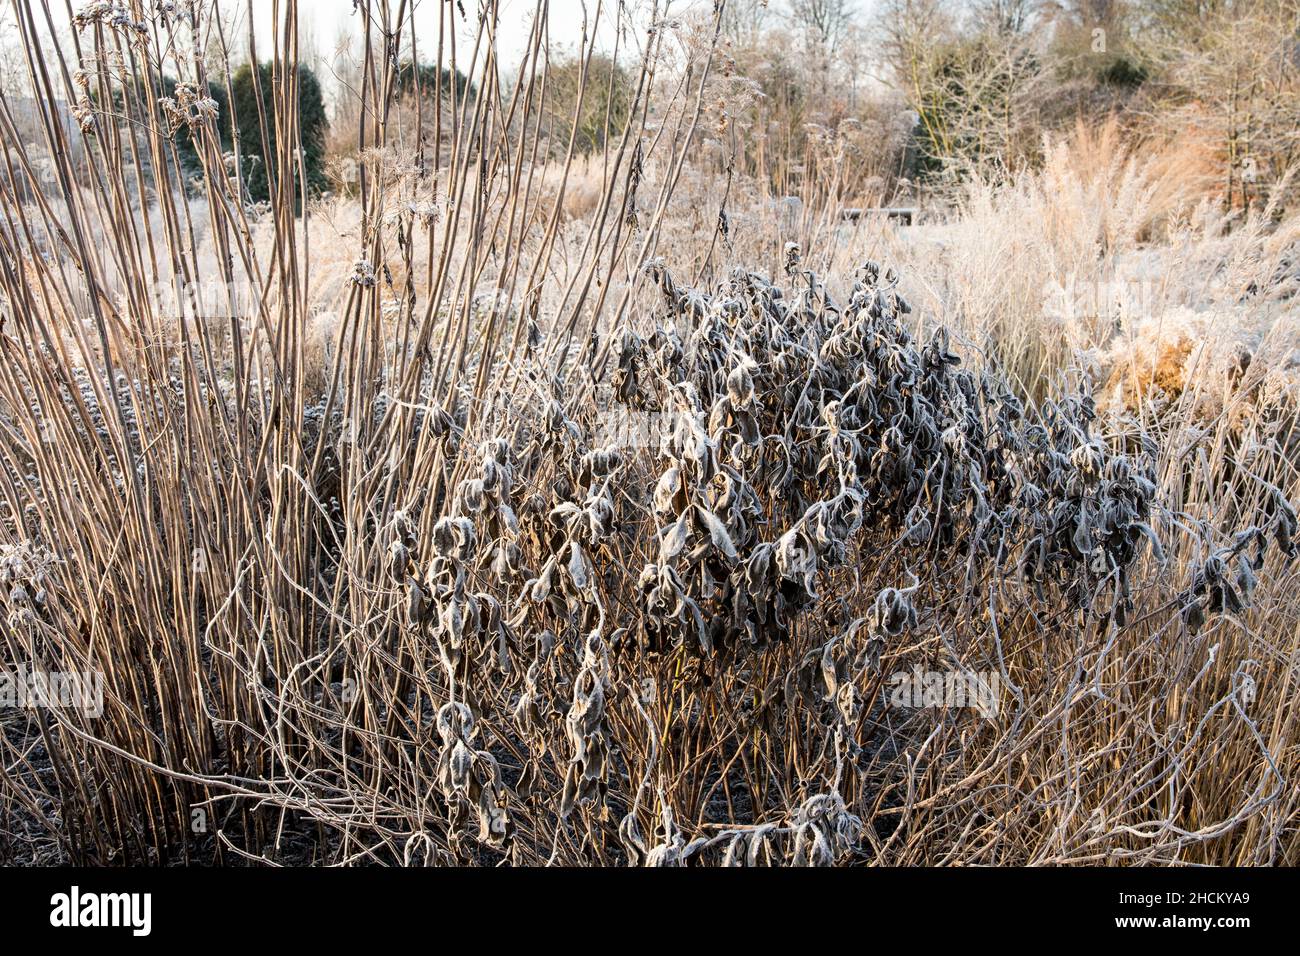 Perennials and ornamental grasses in winter with hoar frost Stock Photo